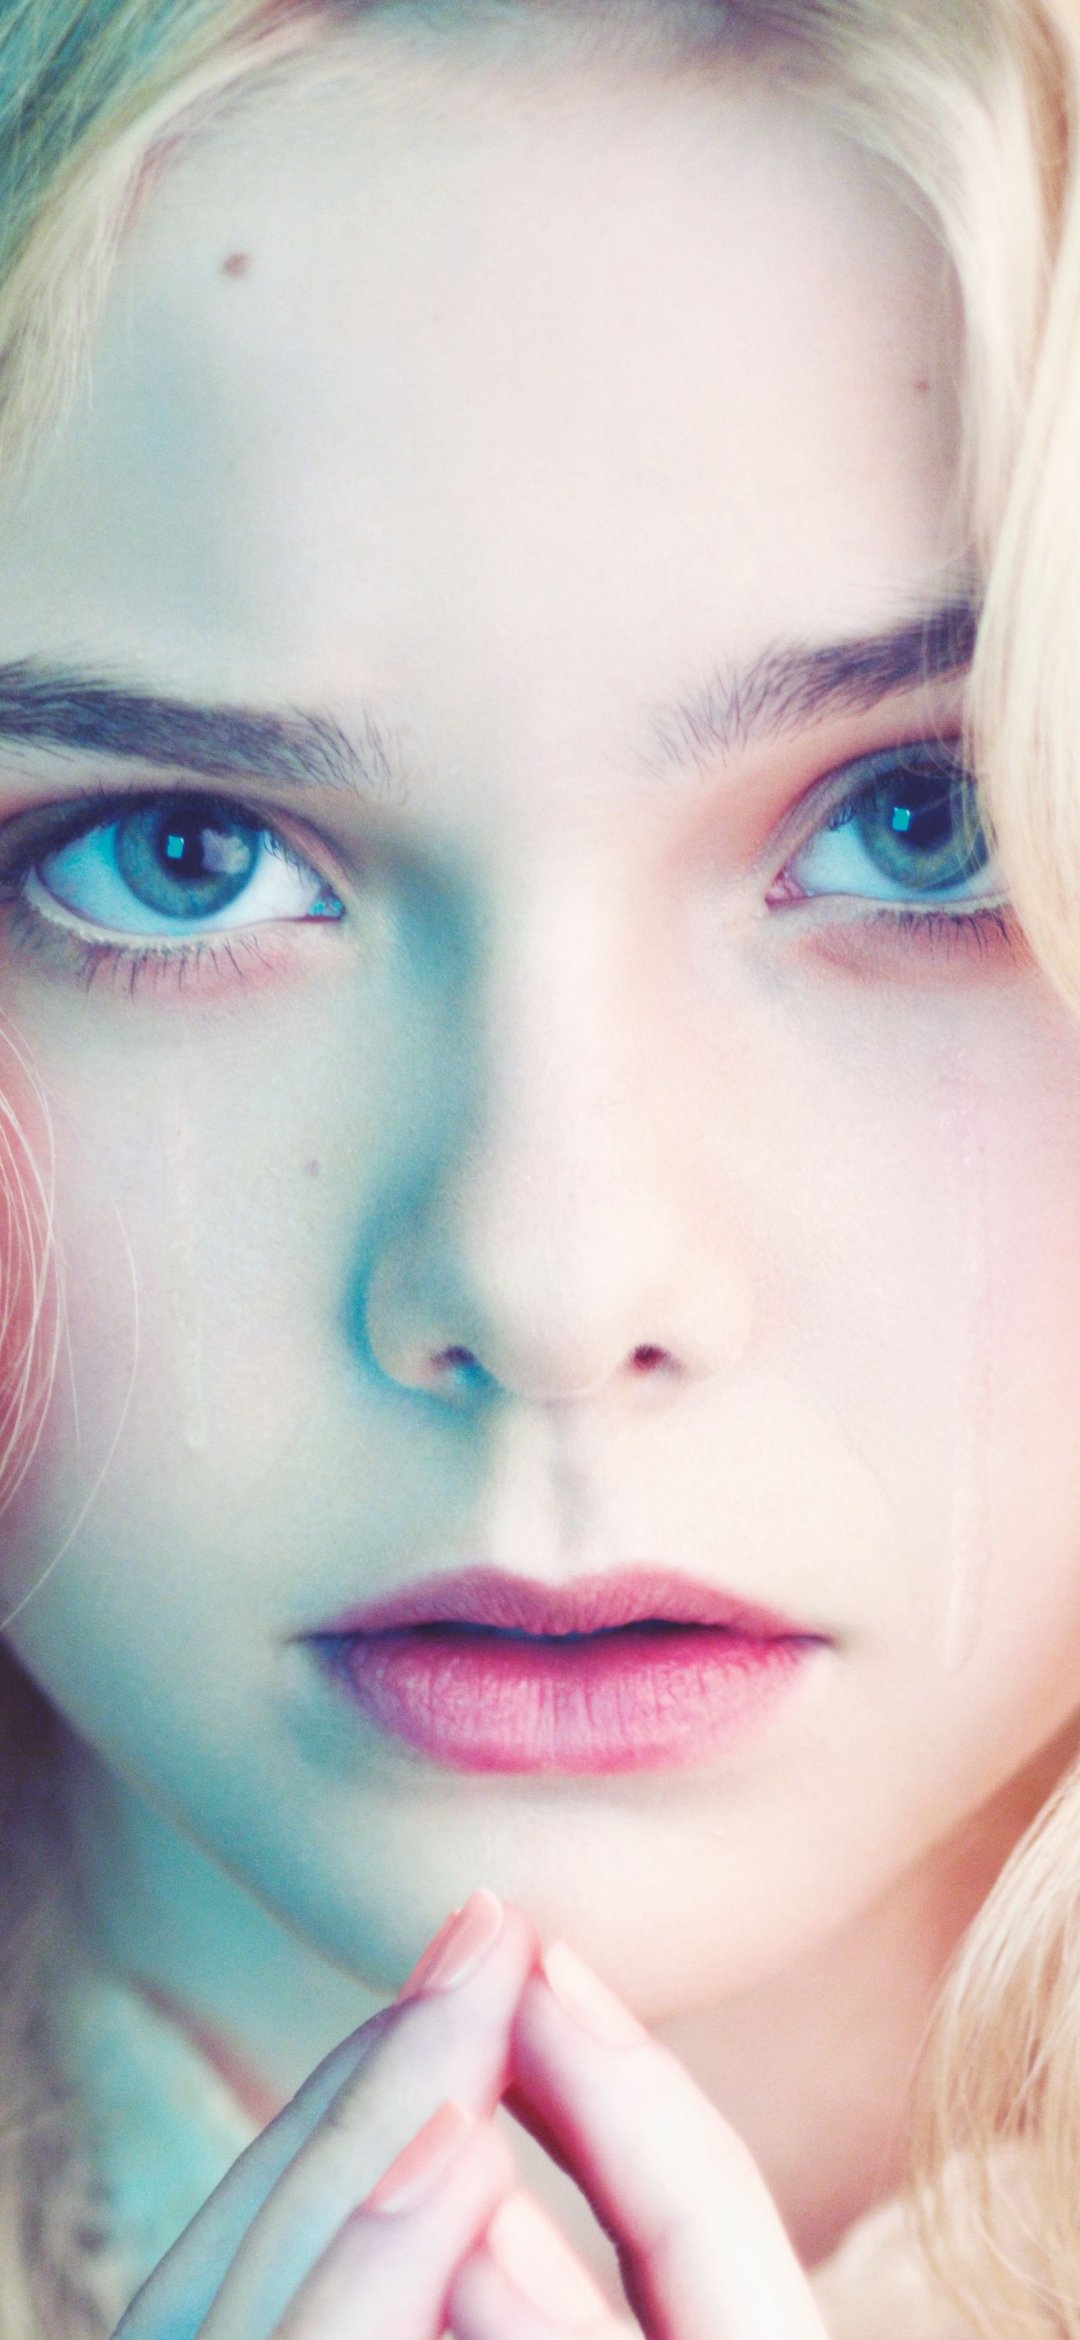 Elle Fanning: Appeared in the music video for Grouplove's single "Good Morning". 1080x2340 HD Wallpaper.